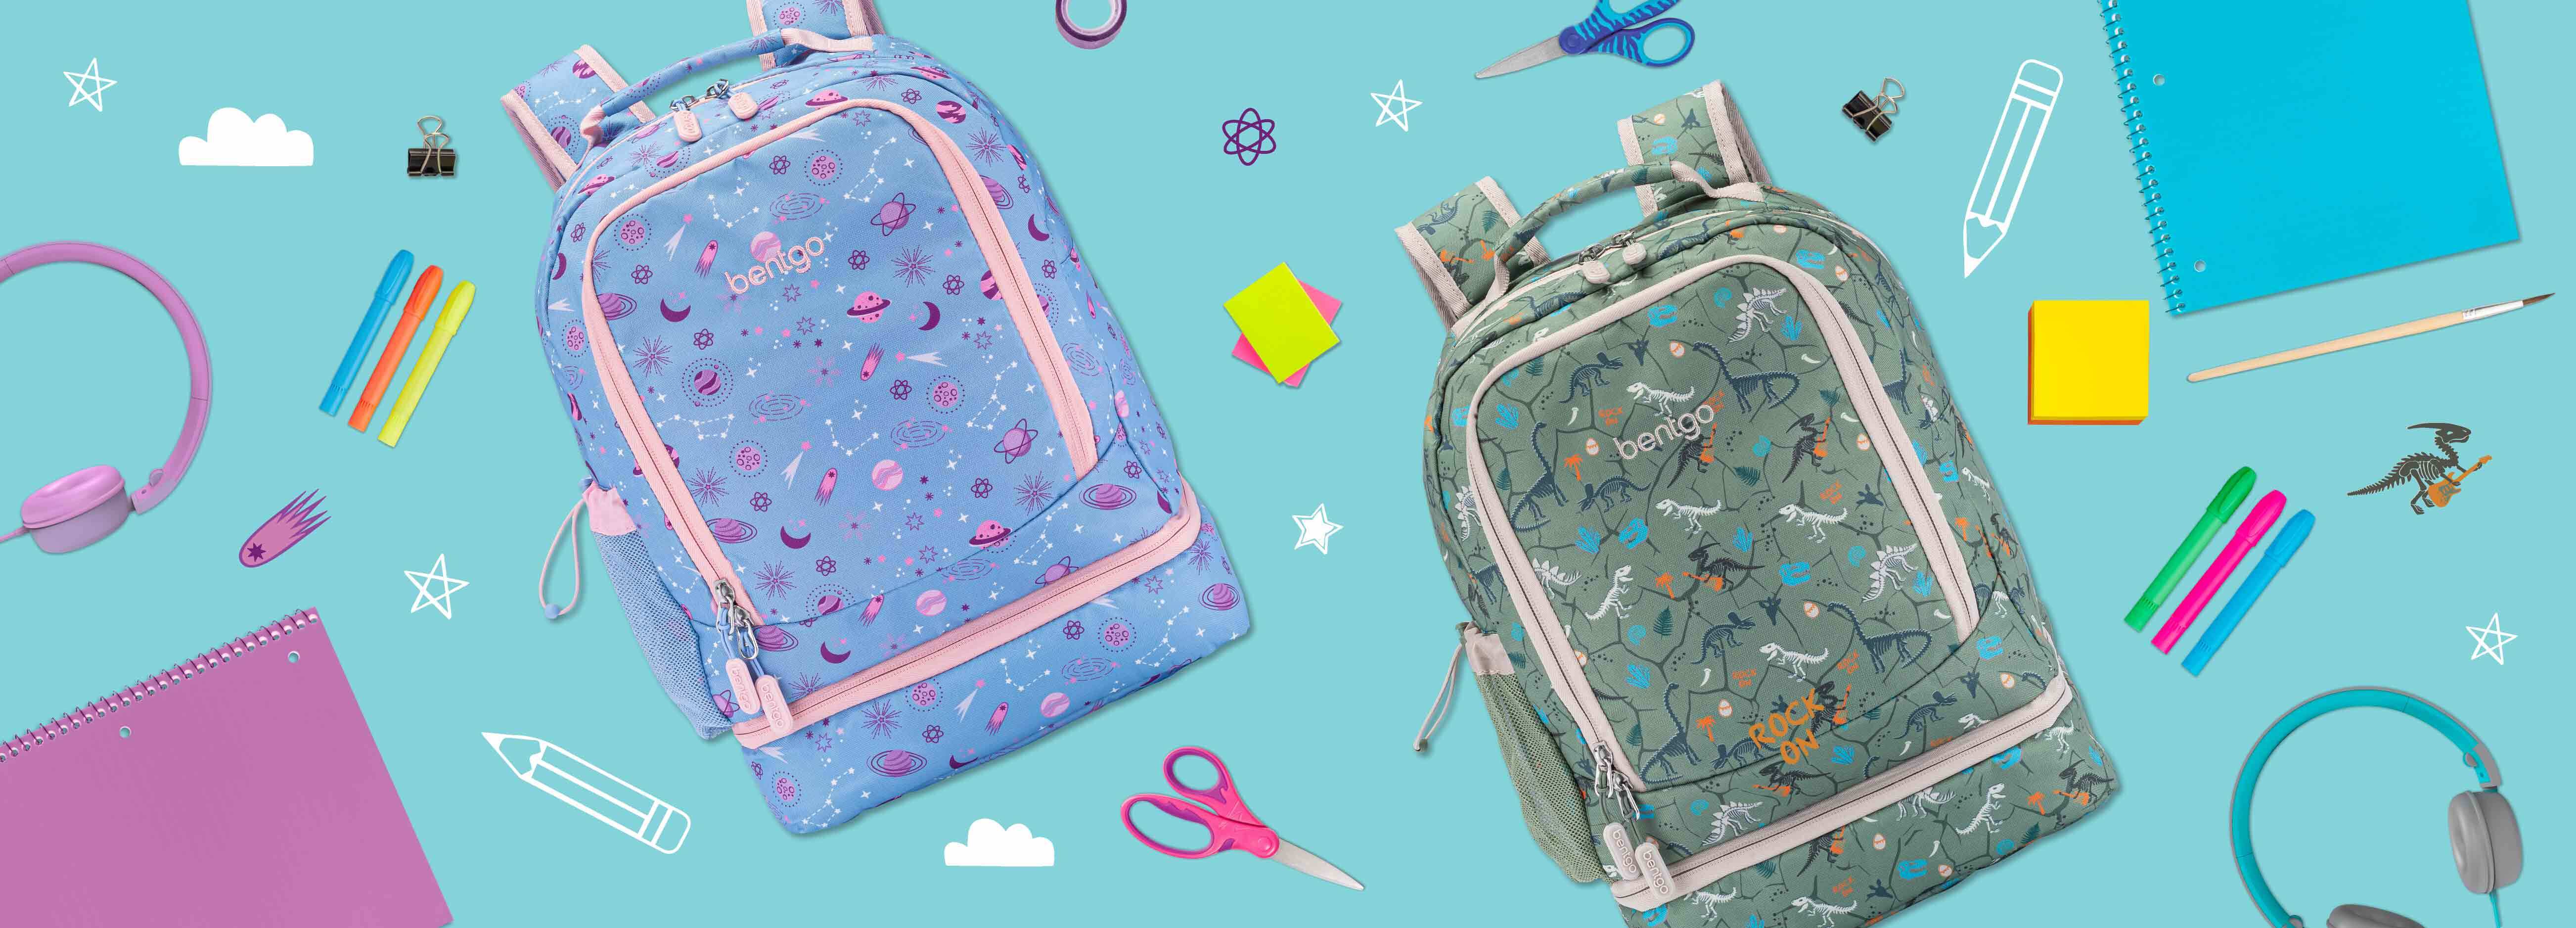 Bluey Backpack and Lunch Box for Kids - 6 Pc Bundle Comoros